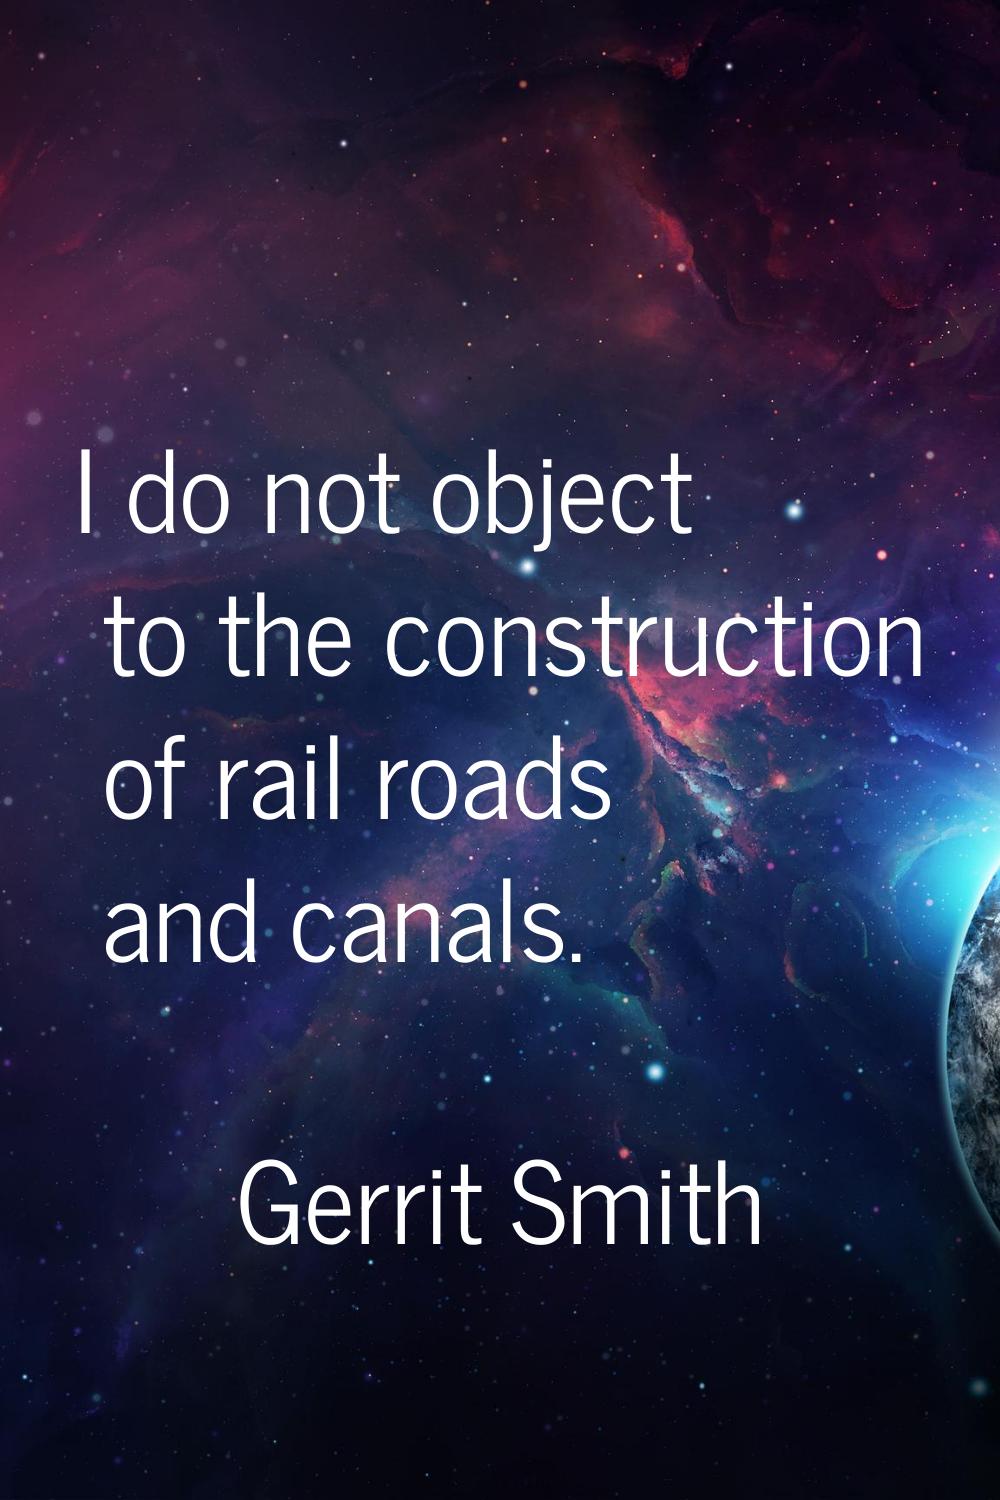 I do not object to the construction of rail roads and canals.